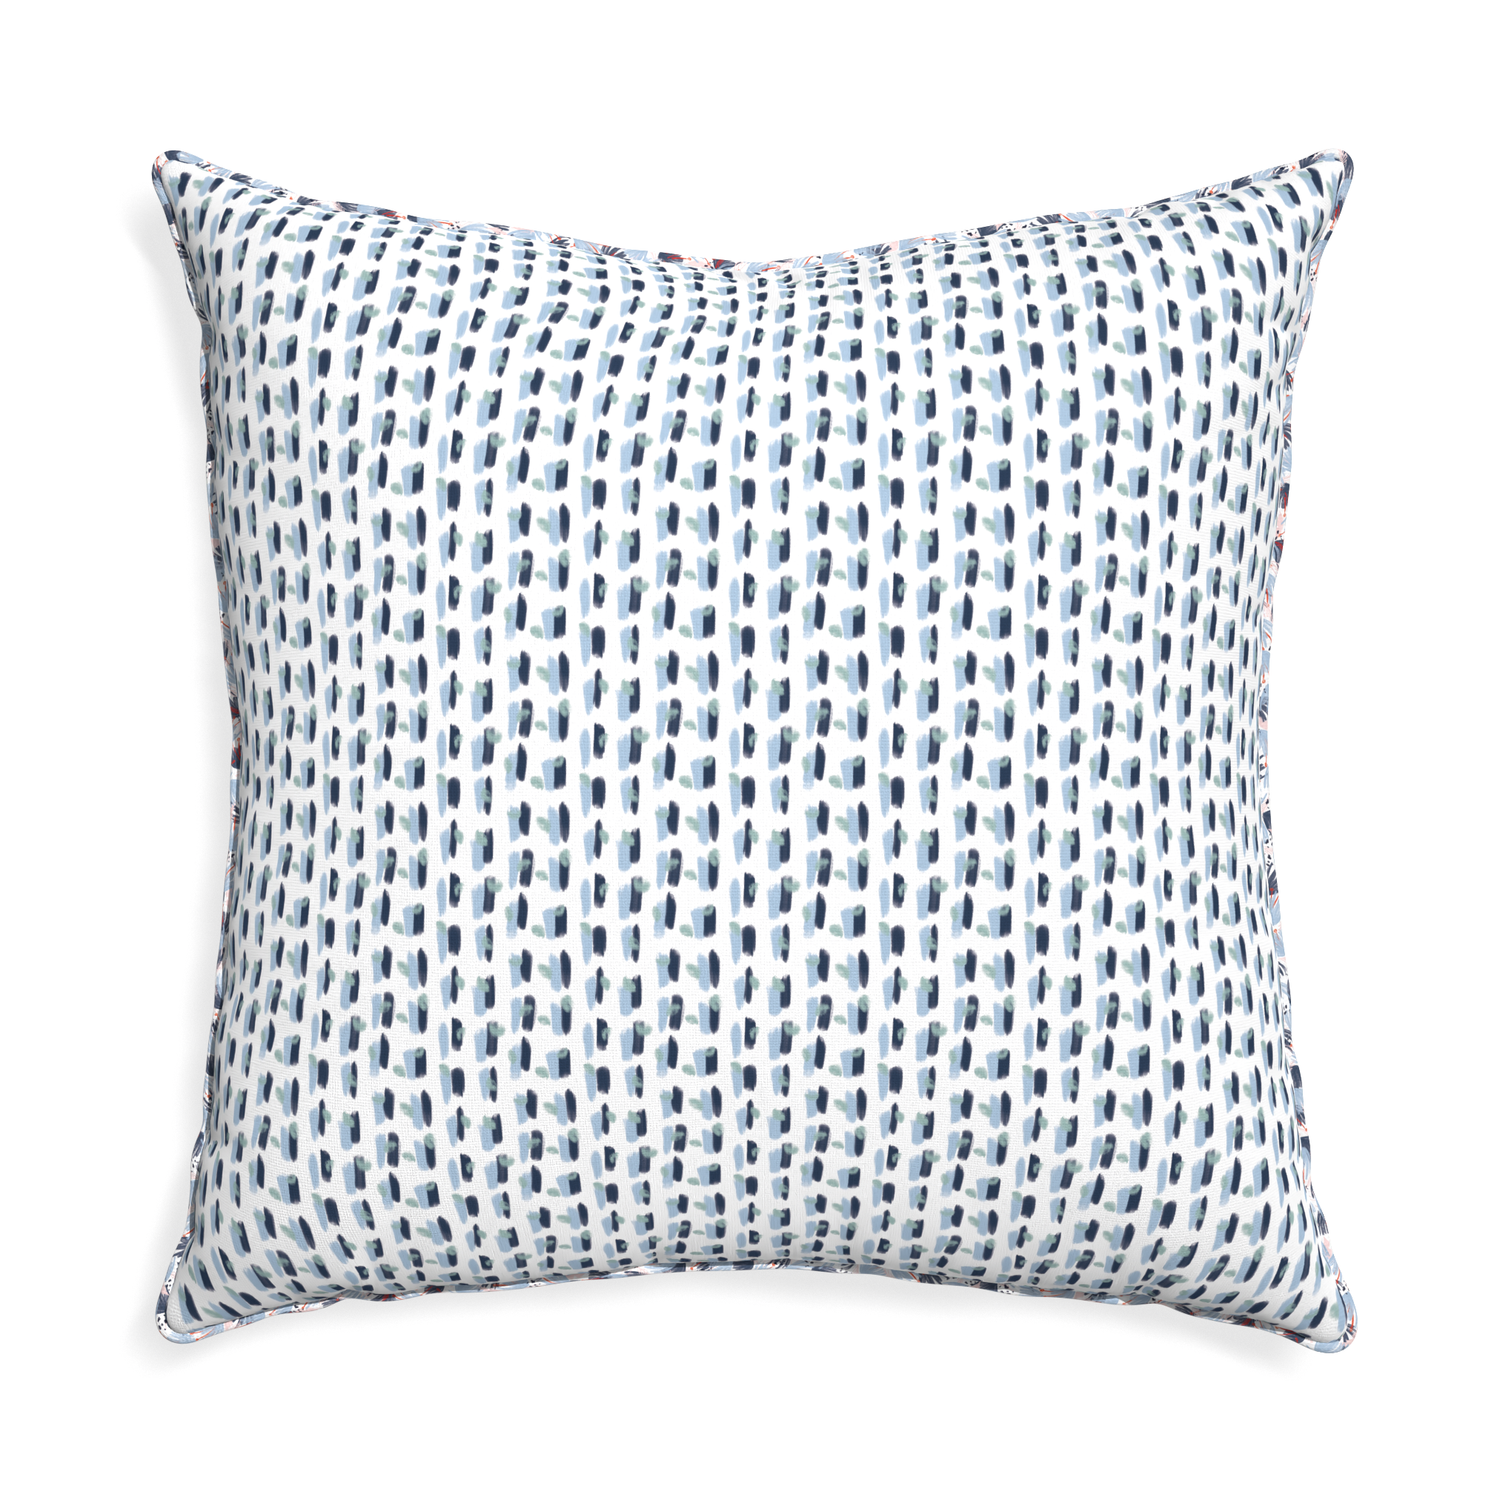 Euro-sham poppy blue custom pillow with e piping on white background